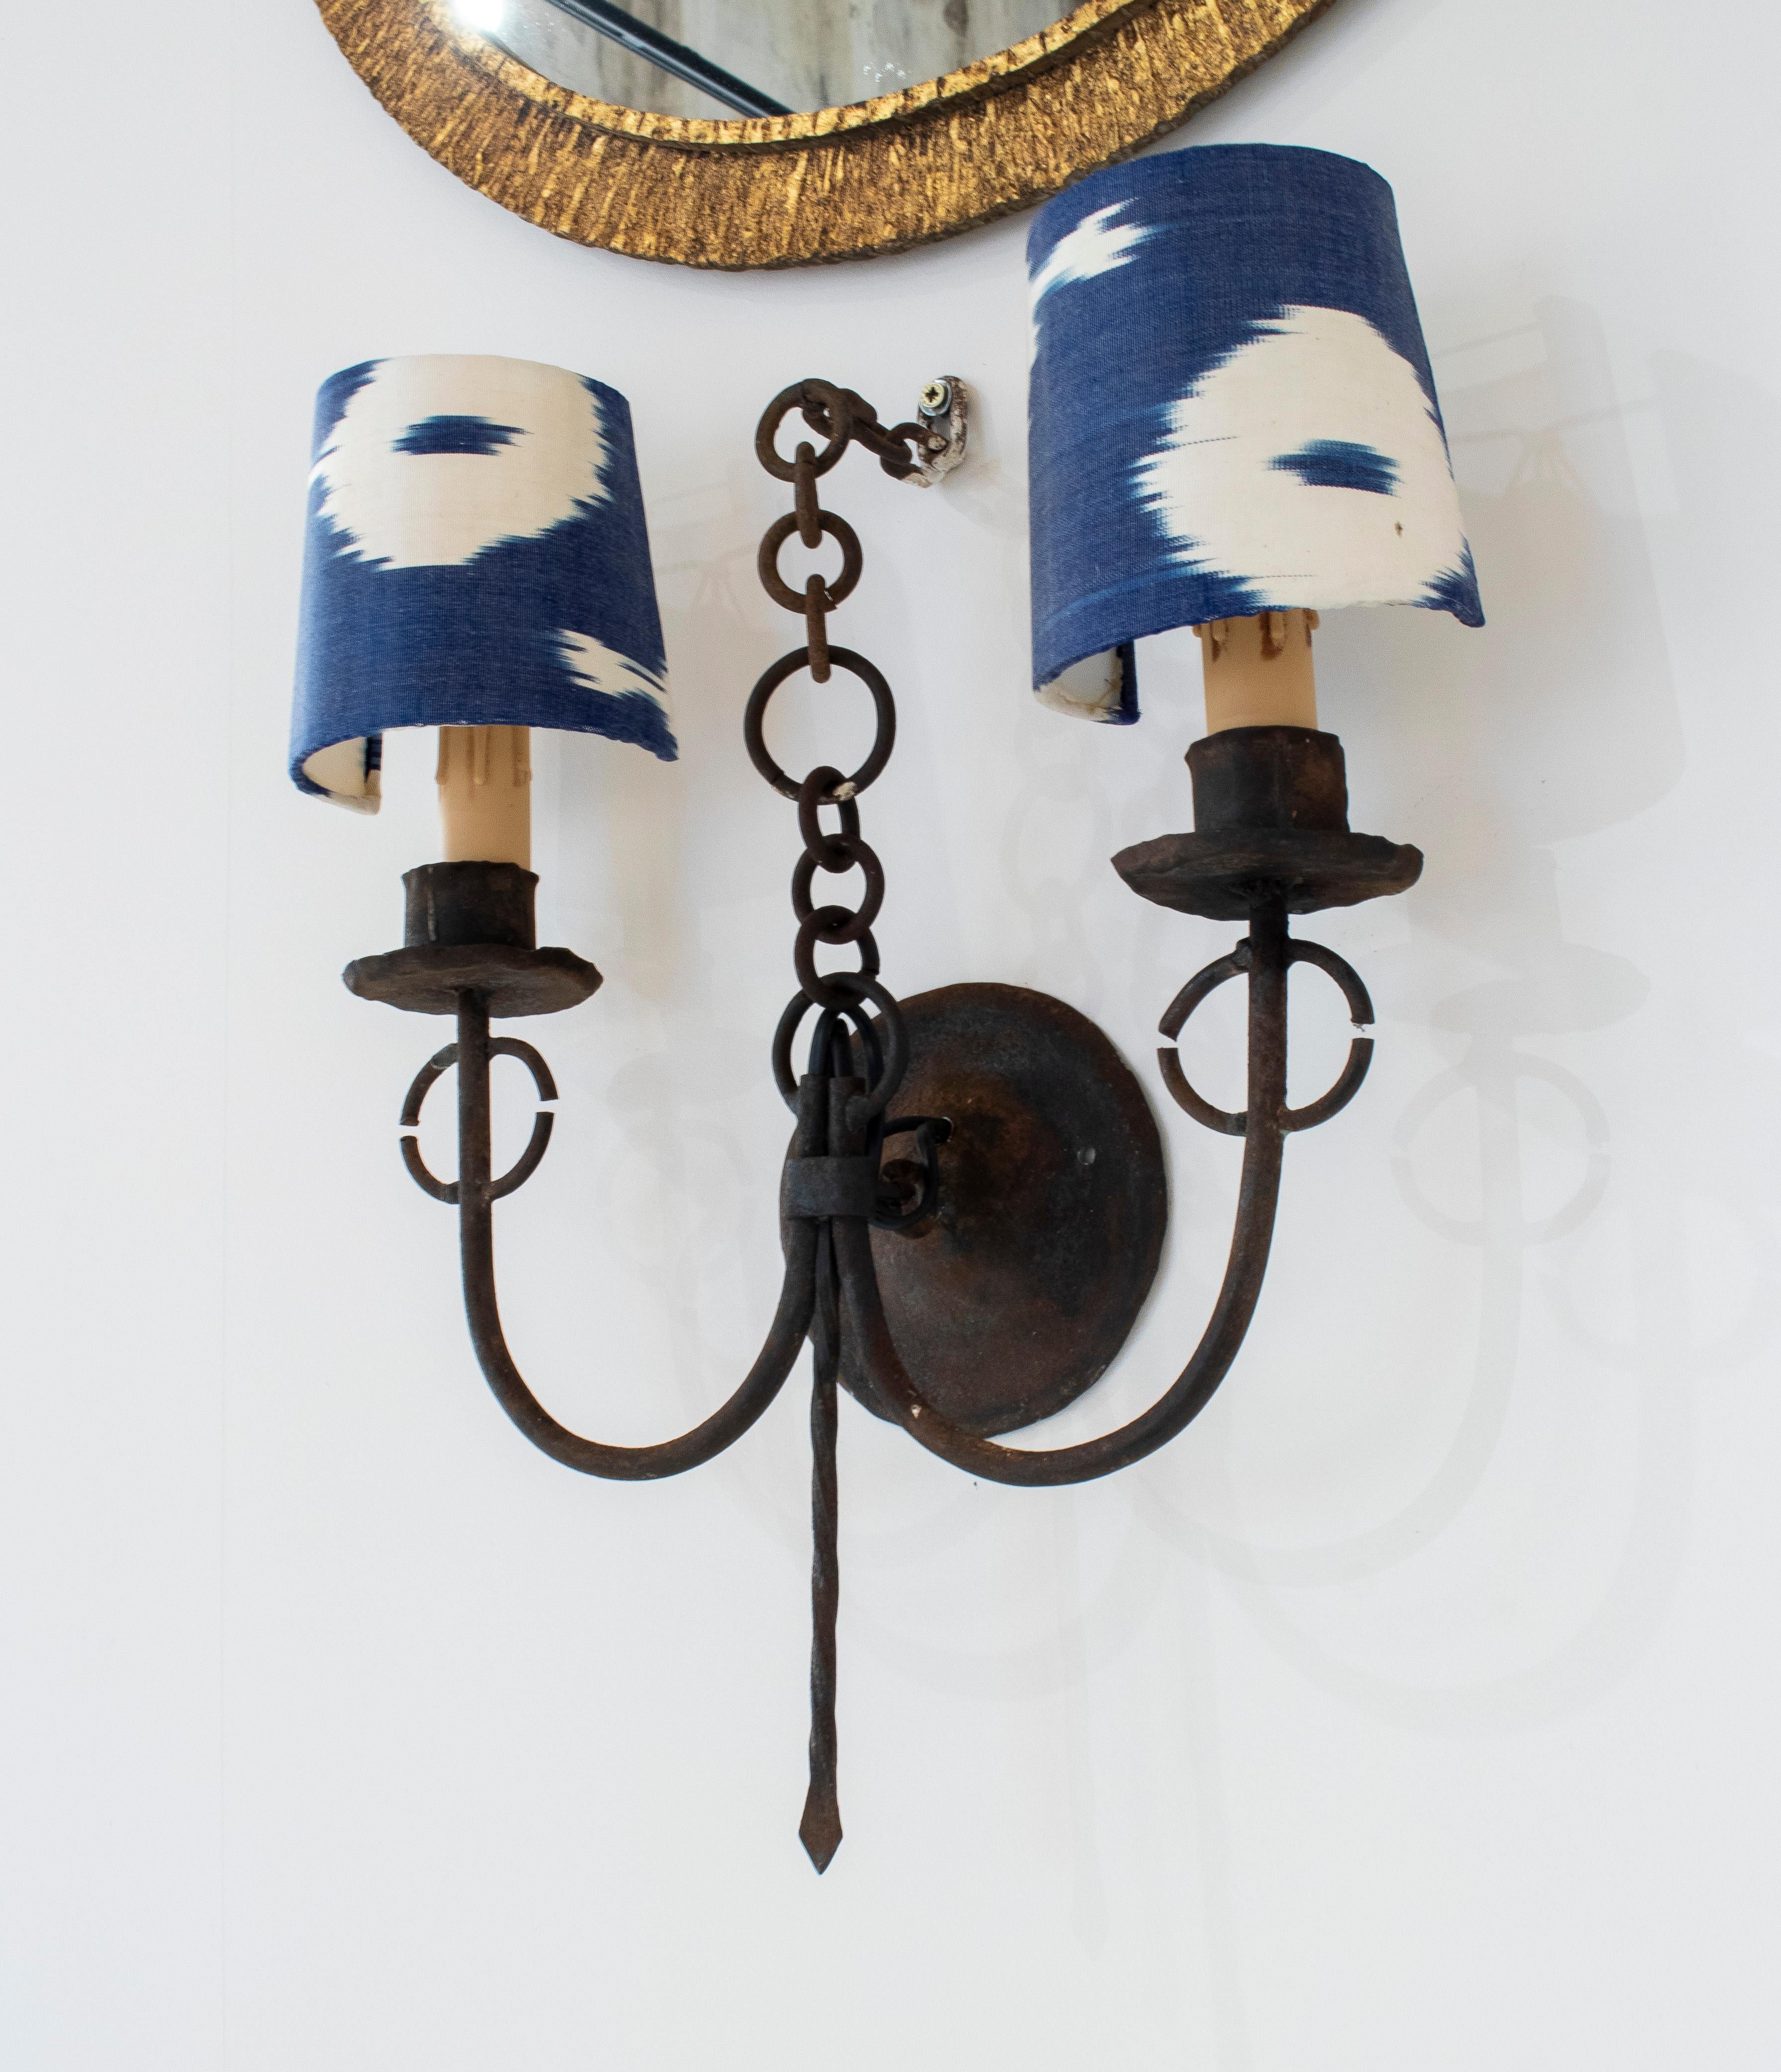 Pair of vintage 1950s Spanish 2-arm iron sconce wall lamps with upholstered lampshades.